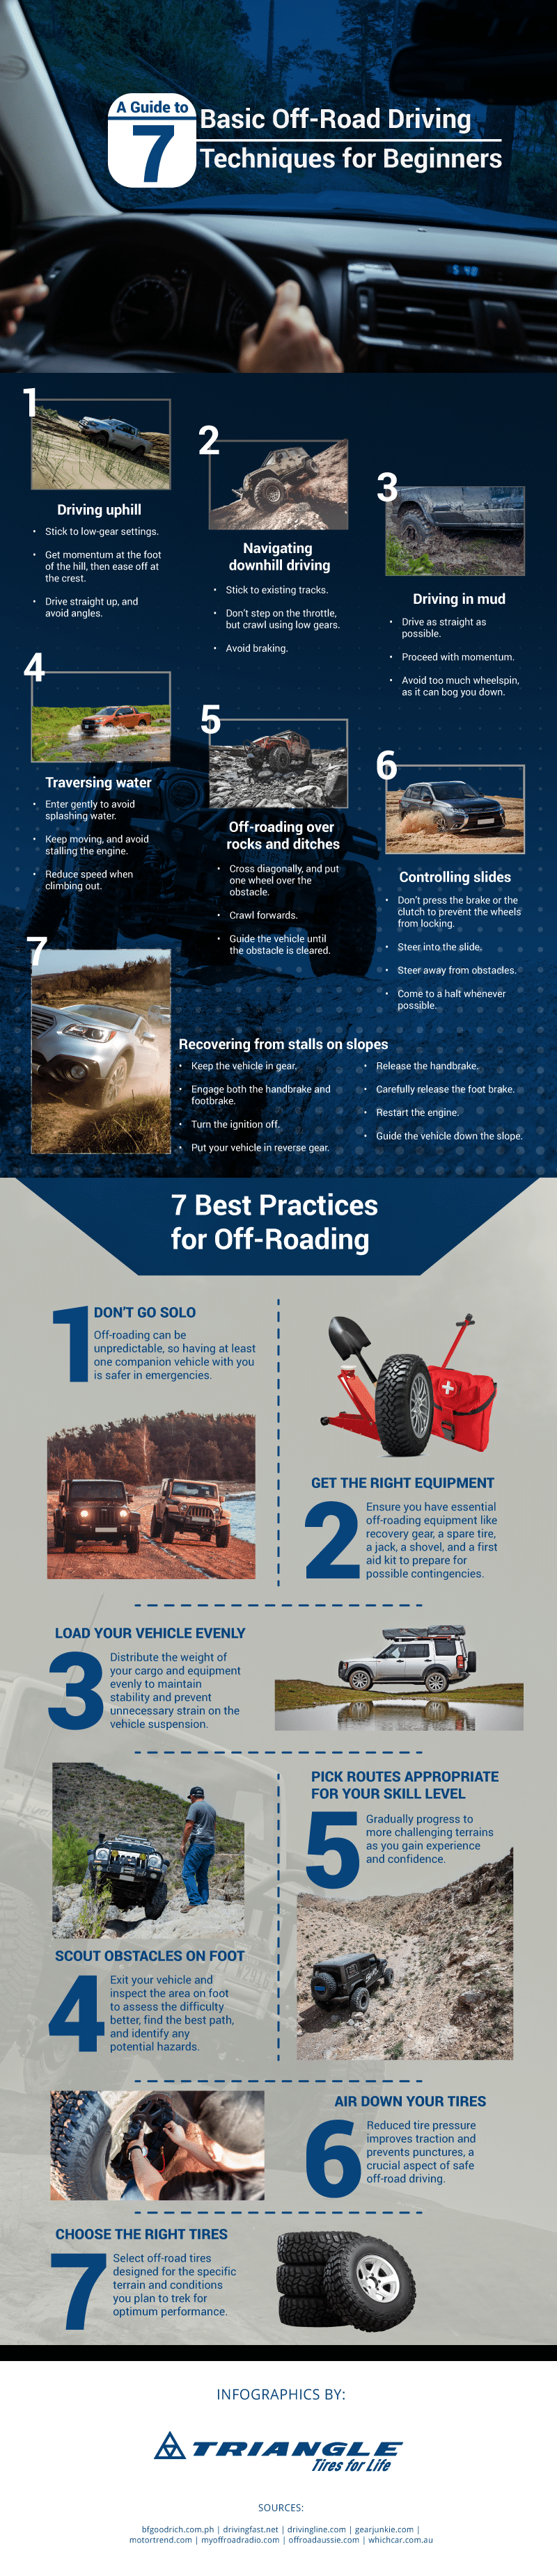 basic offroading techniques for beginners infographic